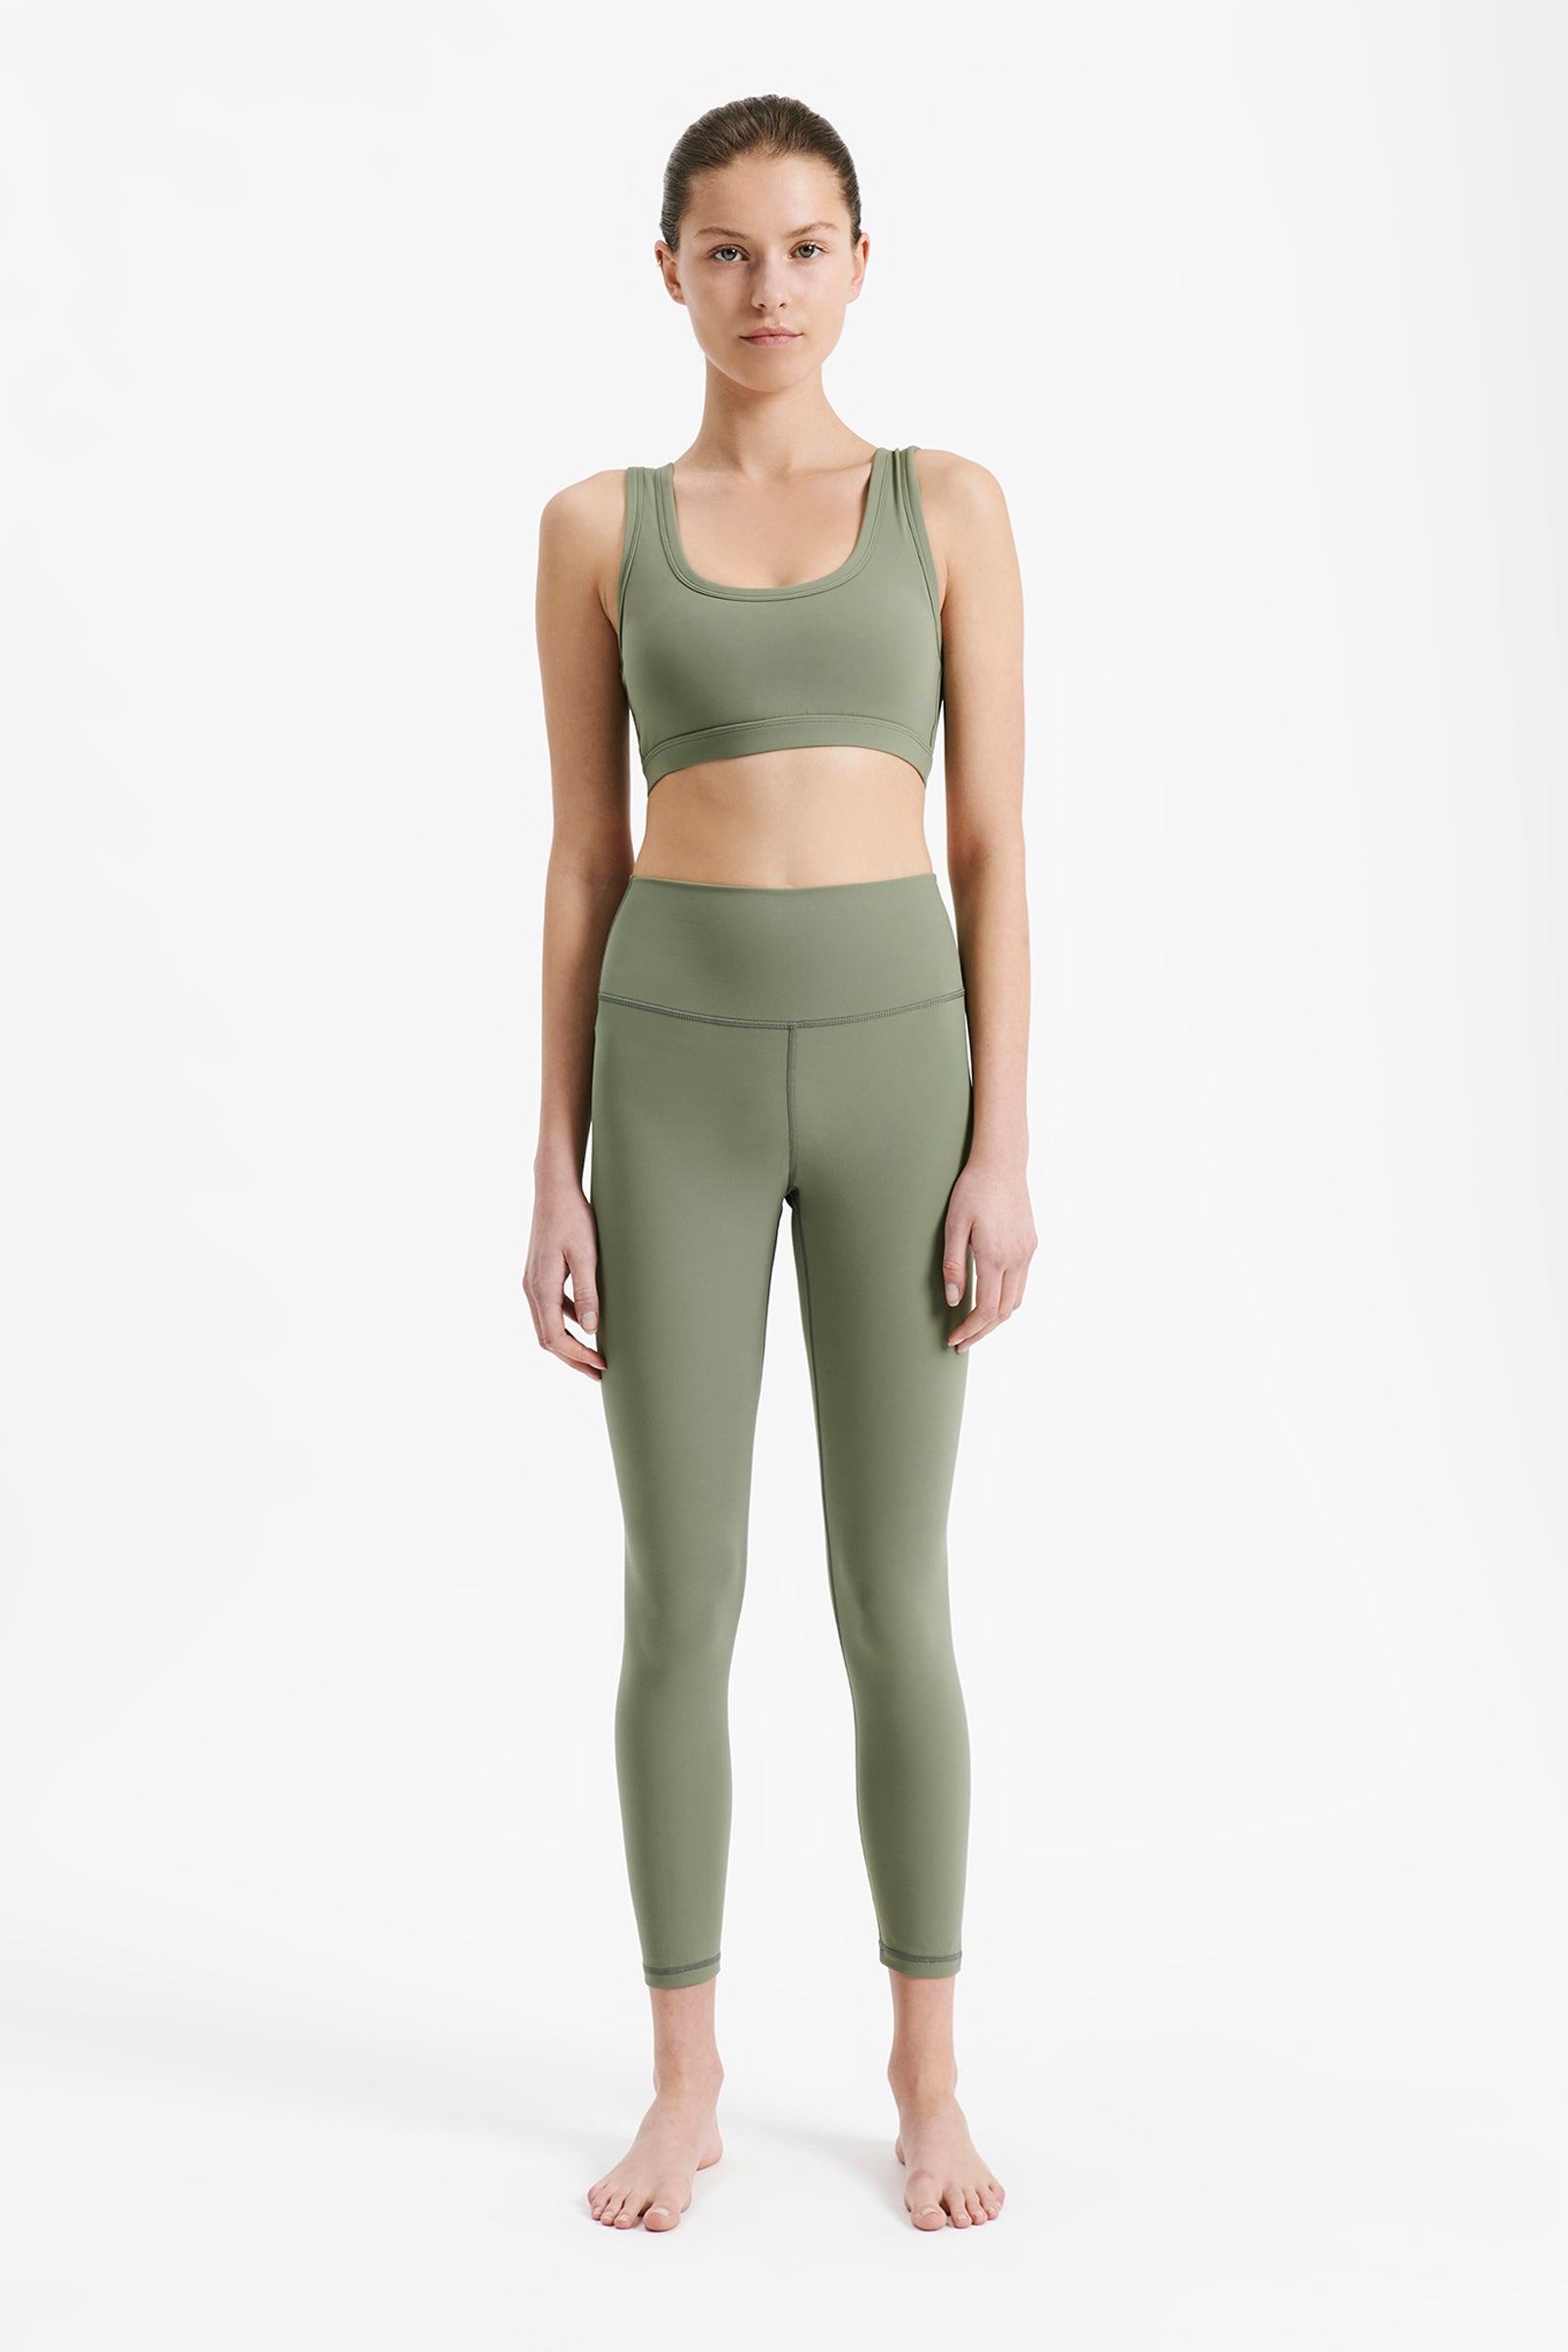 Nude Lucy Nude Active Crop Top In a Green Willow Colour